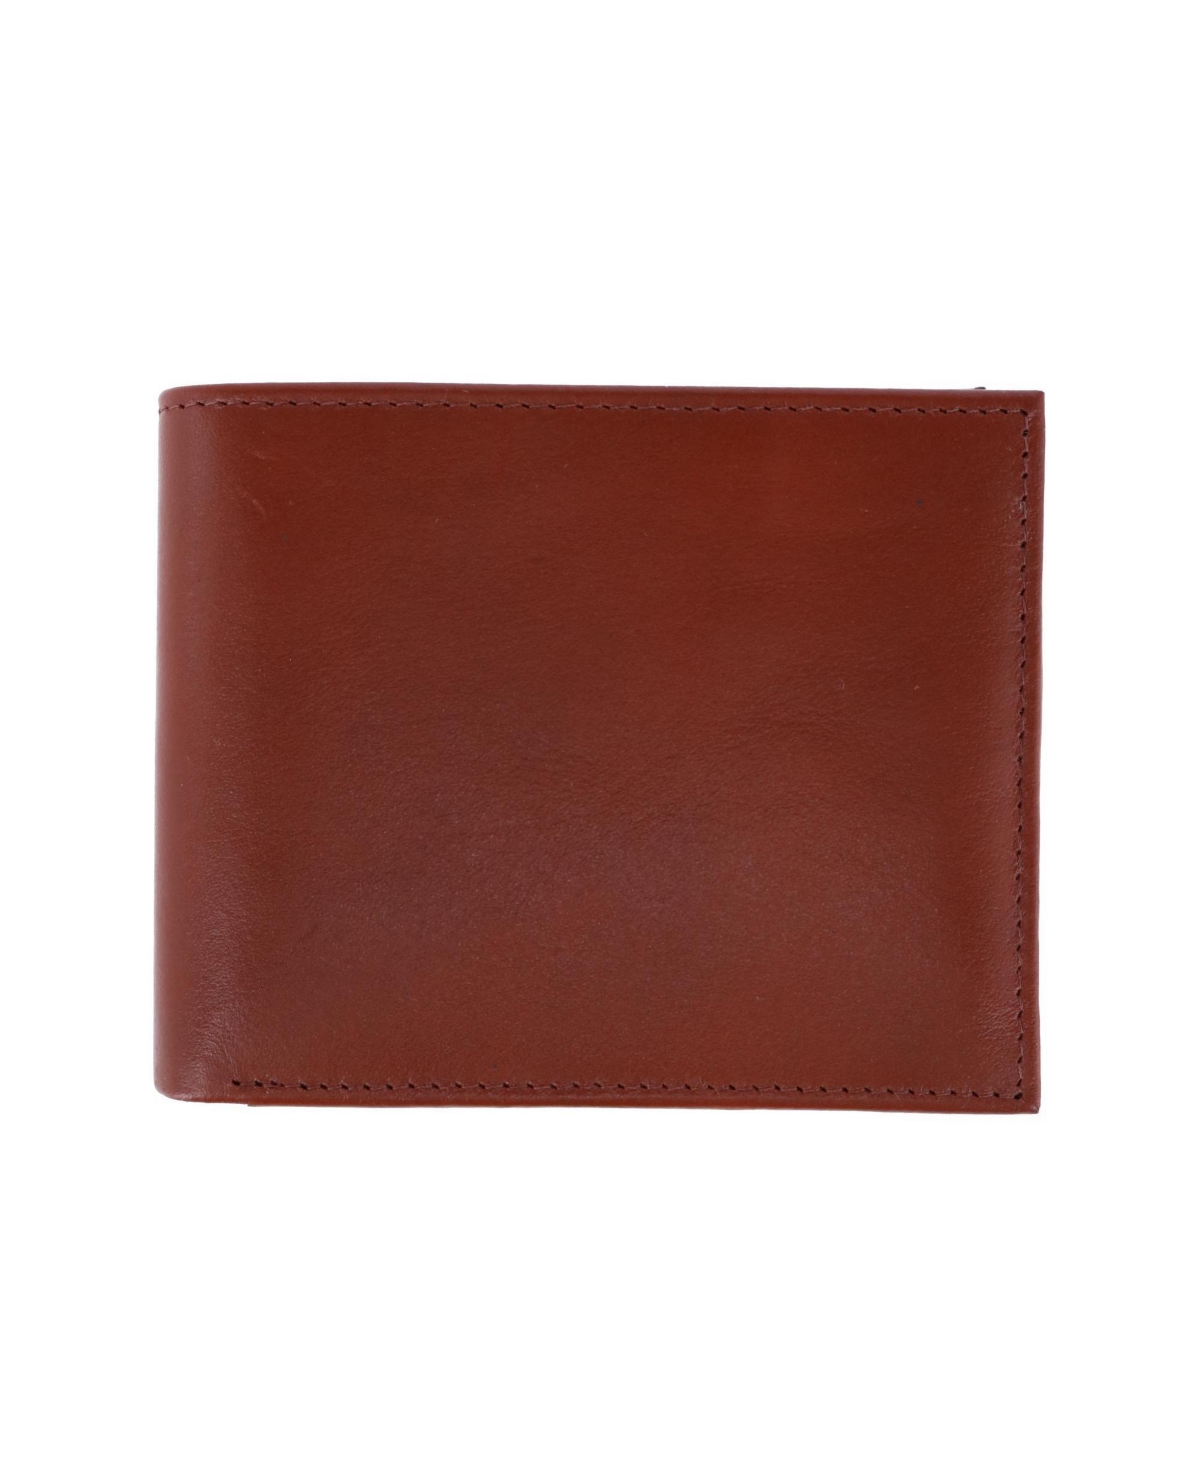 TRAFALGAR ORION LEATHER 8-SLOT BI-FOLD WALLET WITH REMOVABLE ID CARD CASE